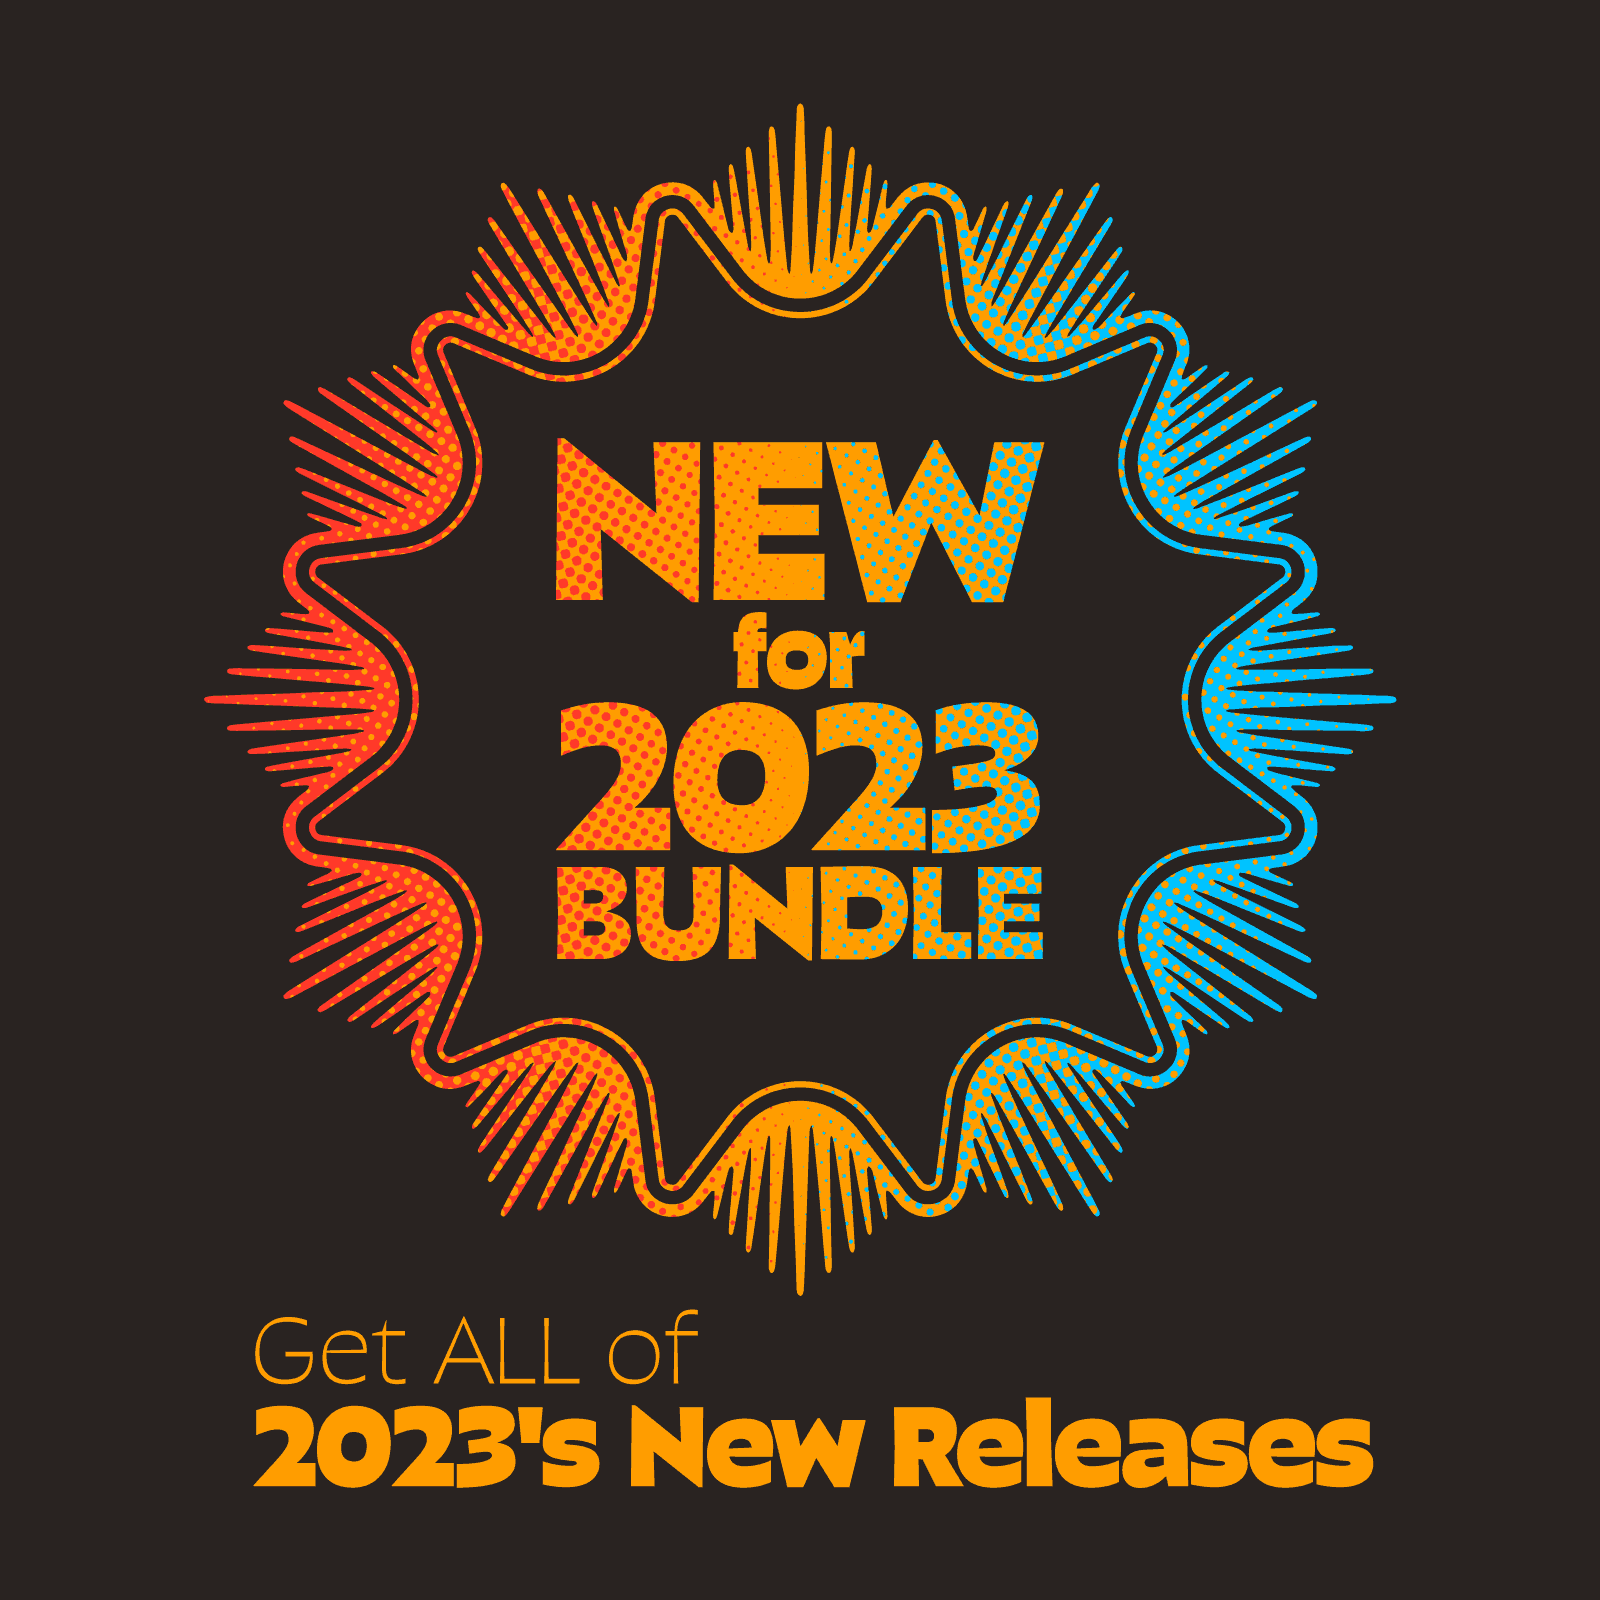 New for 2023 Bundle